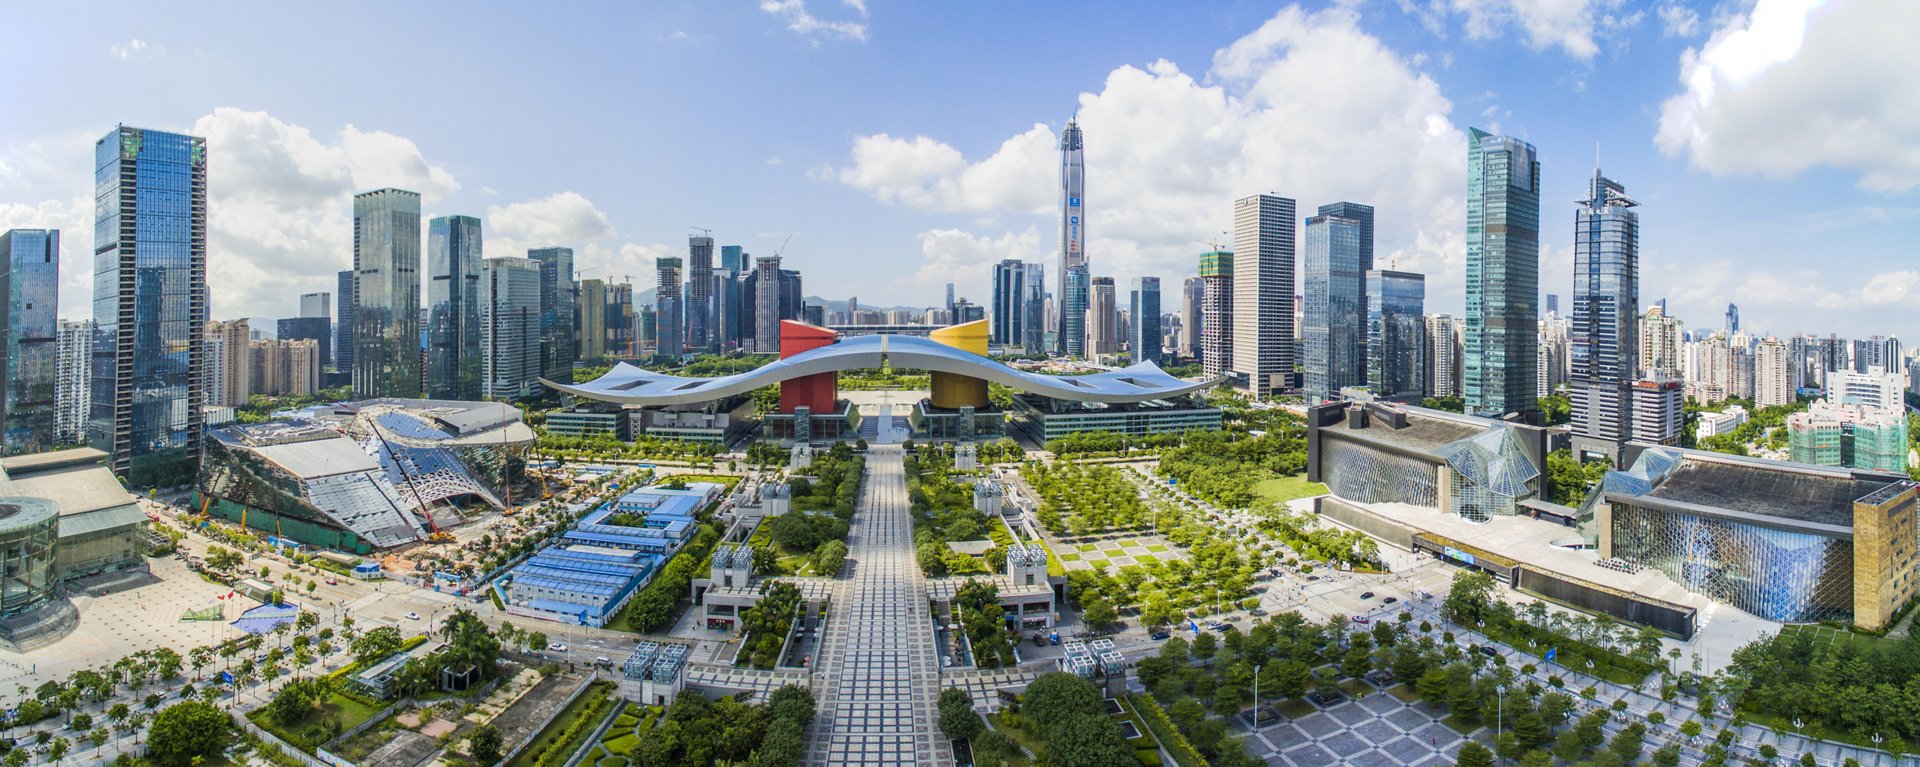 Airbus-China-Innovation-Centre-%20ACIC-in-Shenzhen-the-innovation-powerhouse.jpg